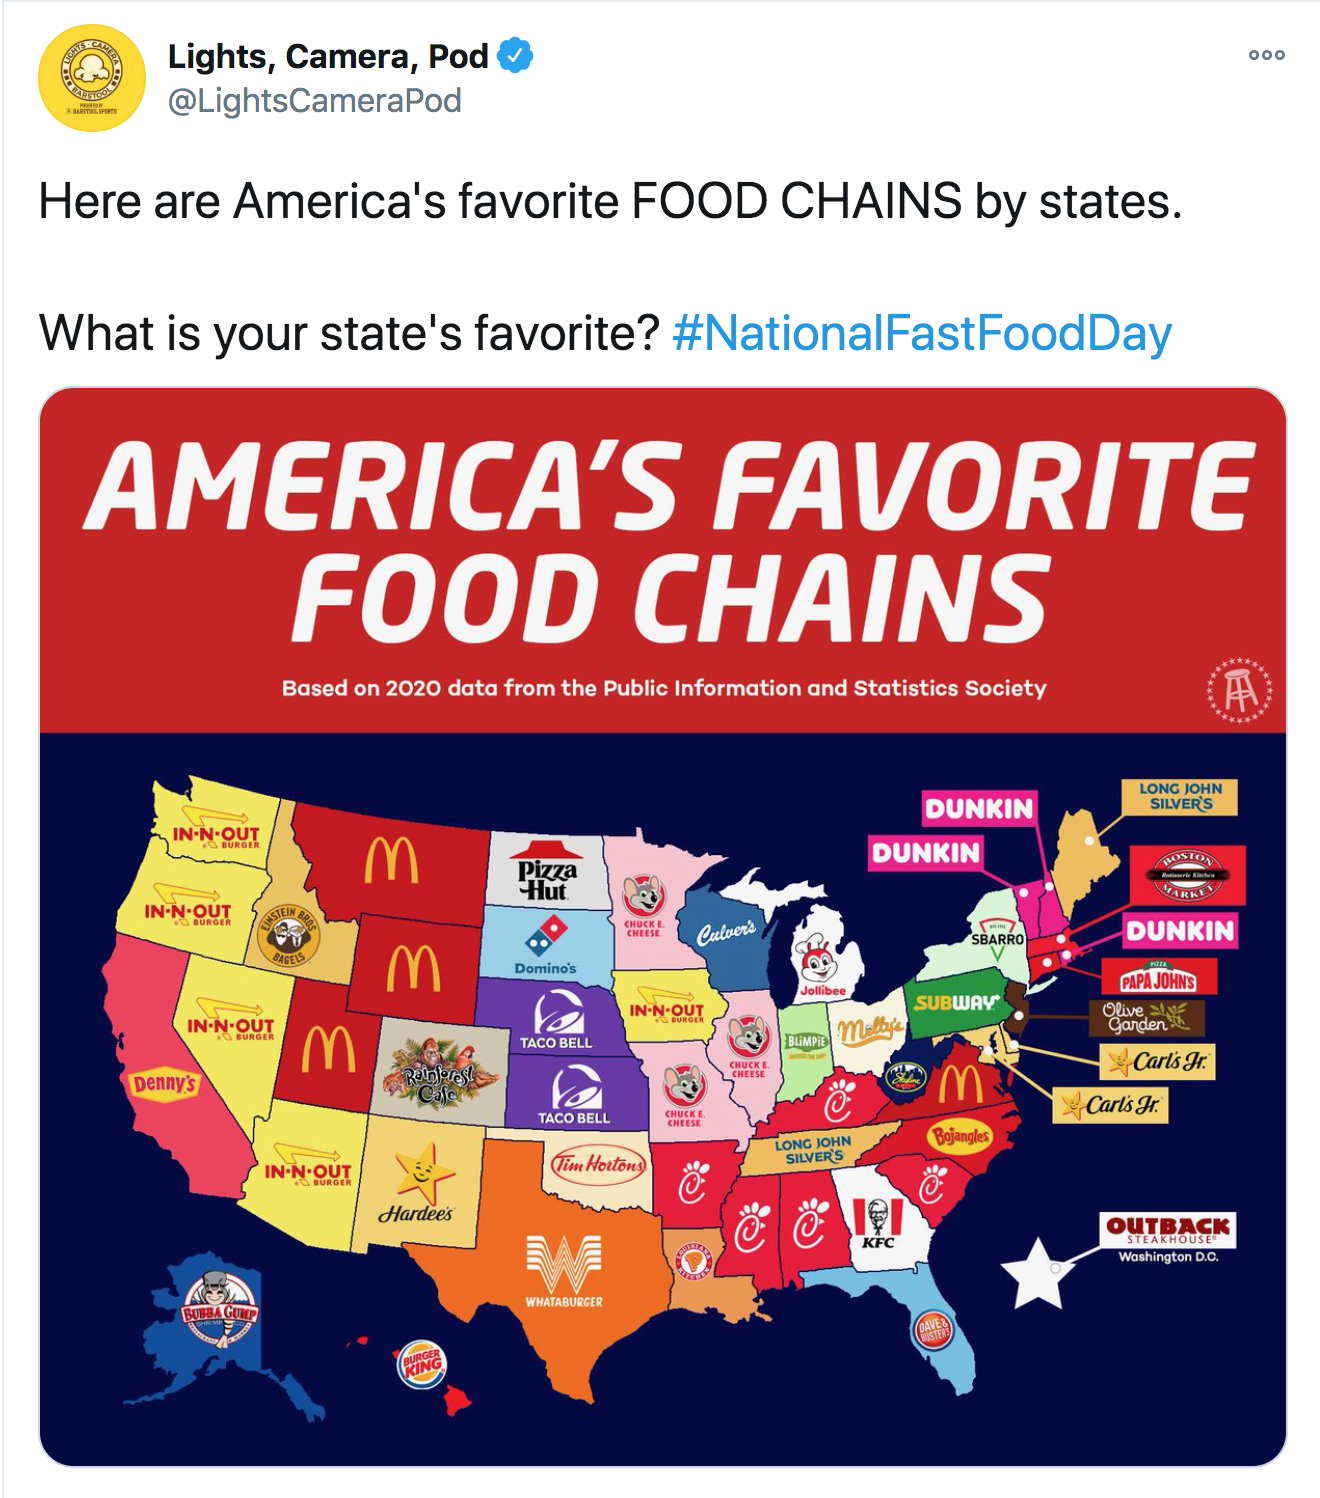 states favorite fast food - 000 Lights, Camera, Pod Here are America's favorite Food Chains by states. What is your state's favorite? America'S Favorite Food Chains Based on 2020 data from the Public Information and Statistics Society Login Nout M Dunkin 